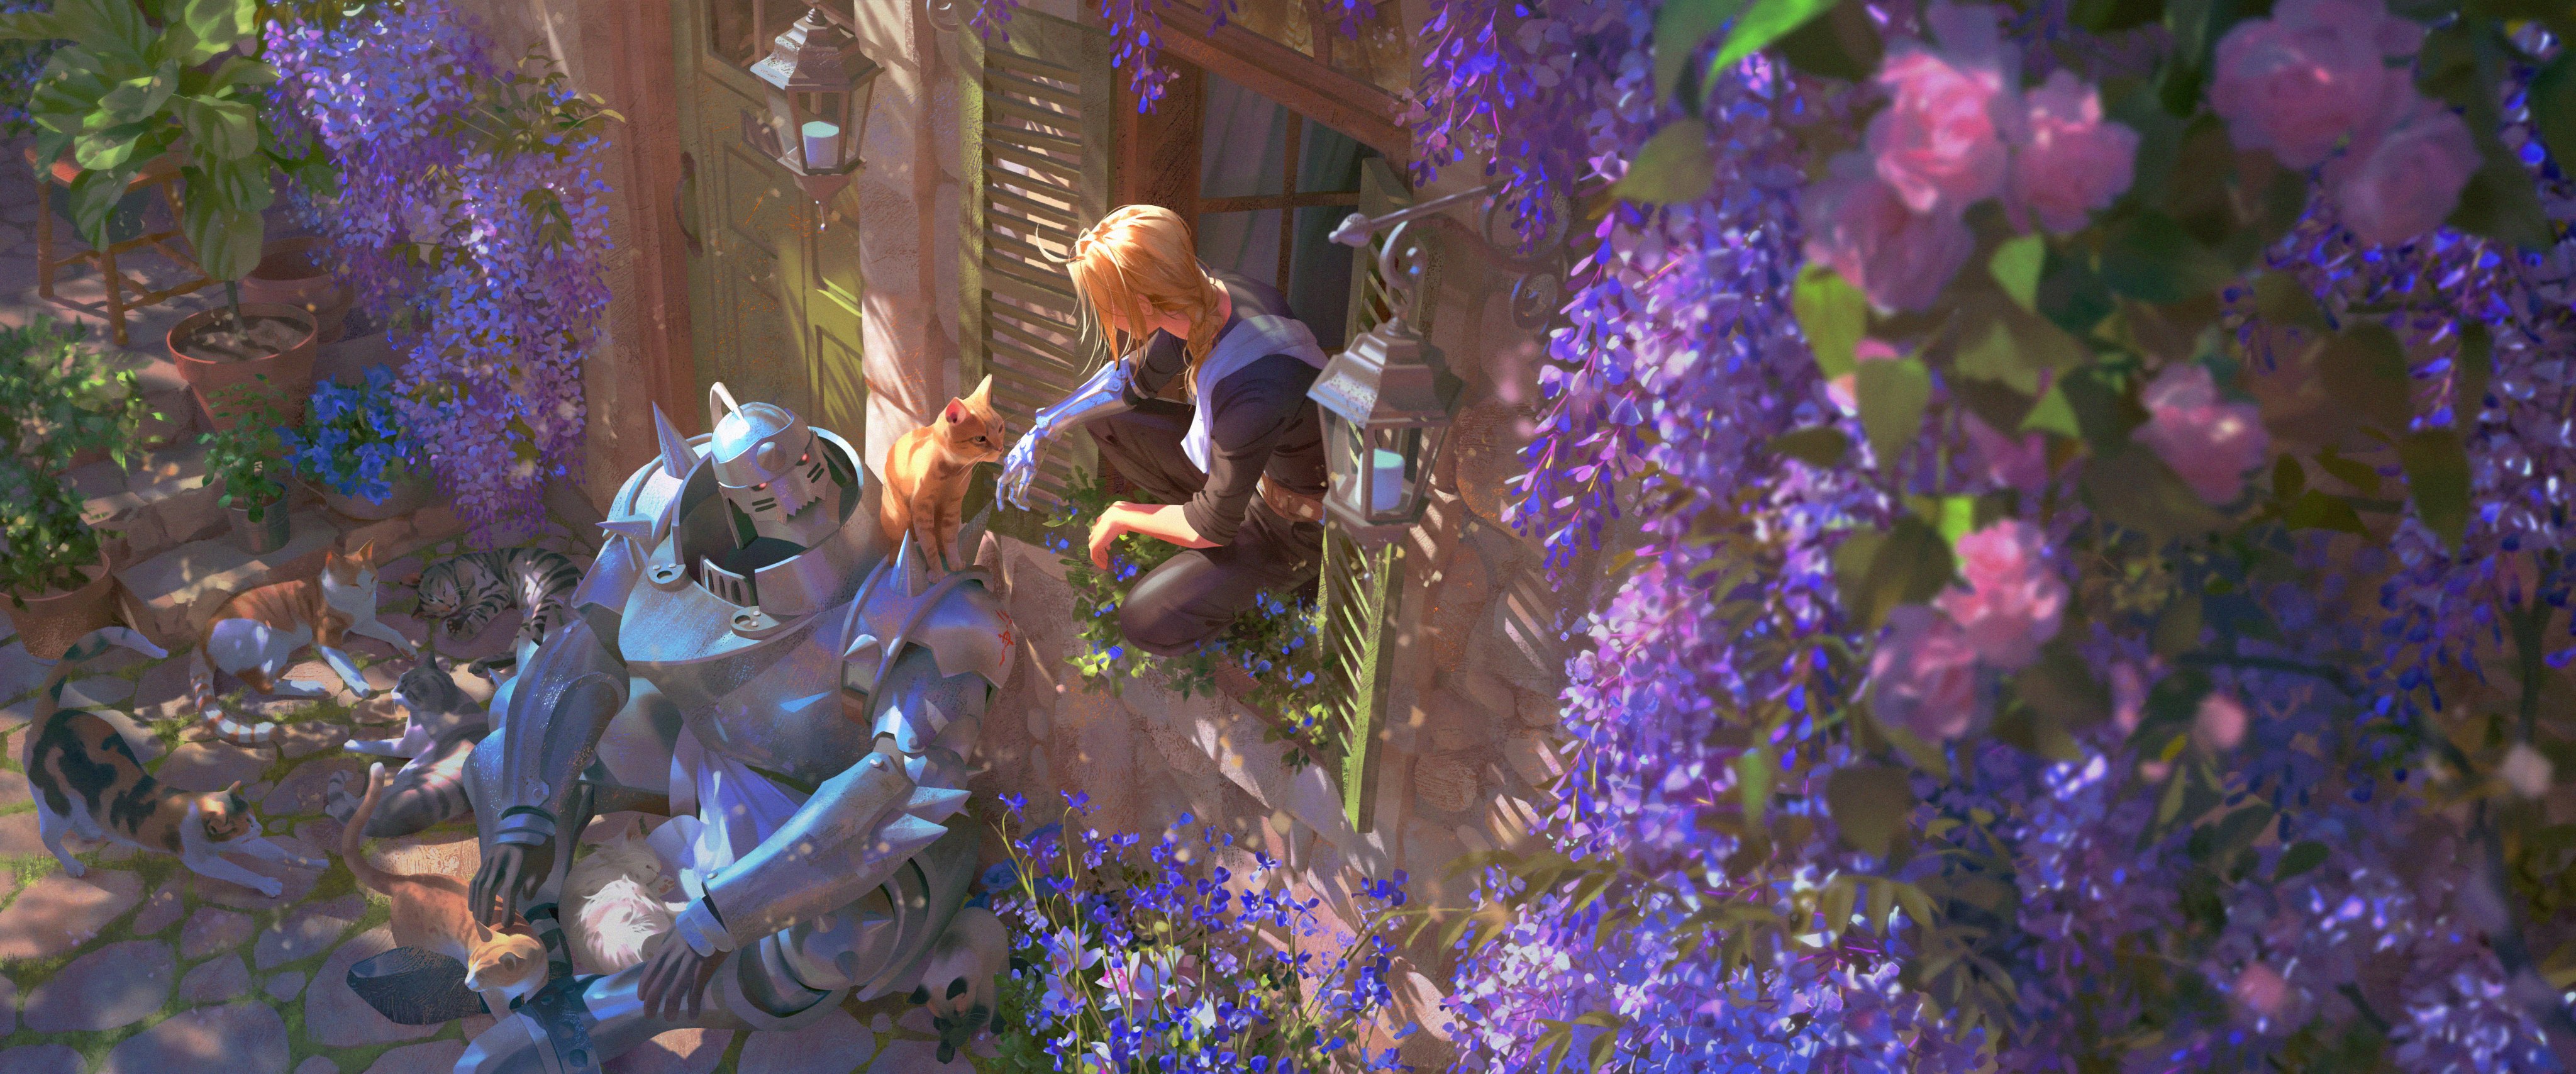 Anime 4096x1707 Full Metal Alchemist cats anime boys siblings Elric Edward armor Elric Alphonse flowers dappled sunlight nature outdoors squatting calico plants house